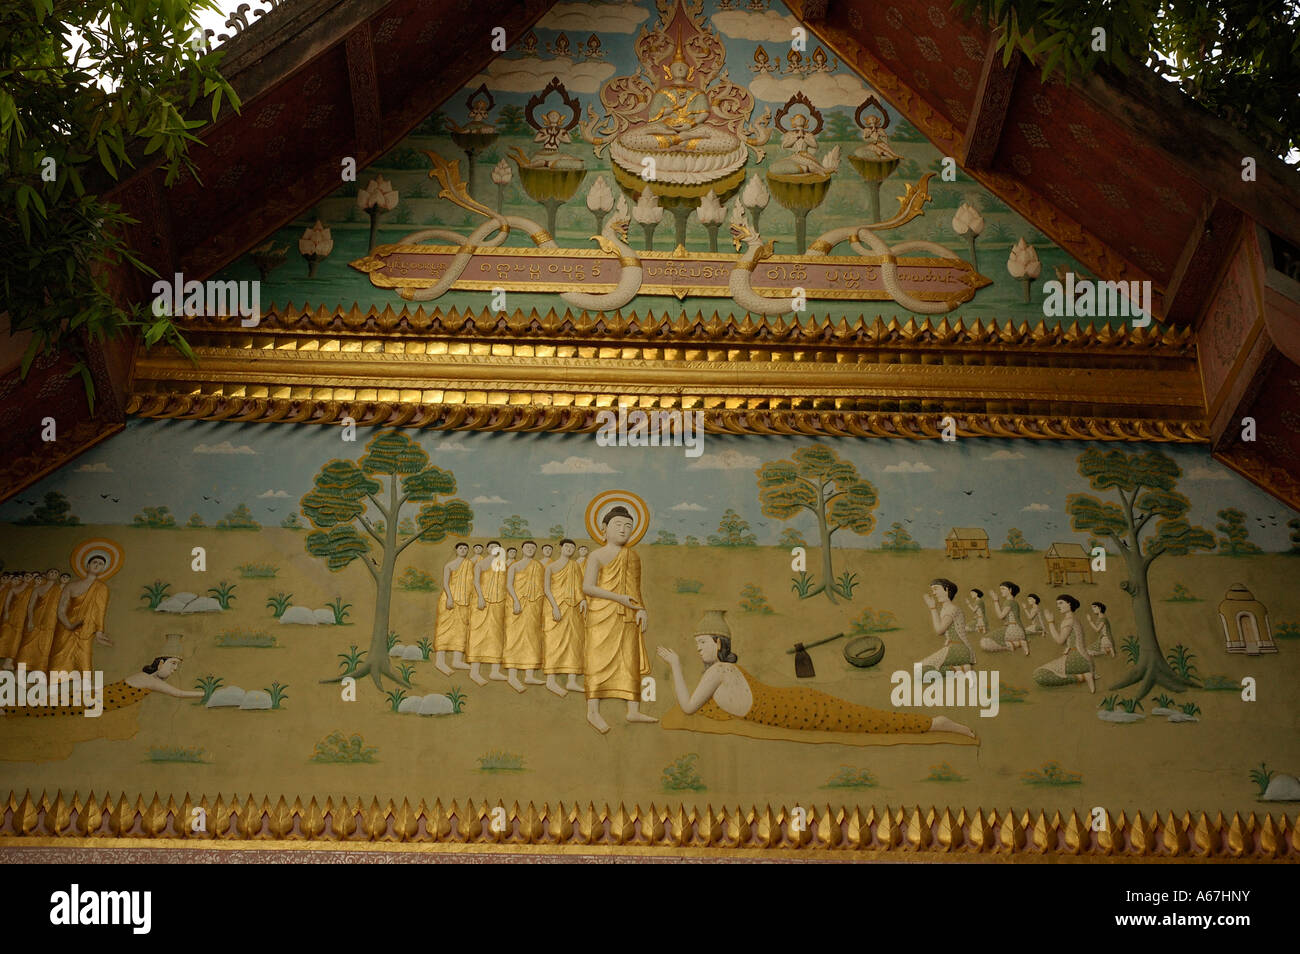 Religious paintings at the Wat Saen Buddhist temple, Luang Prabang, Laos (Lao PDR). Stock Photo